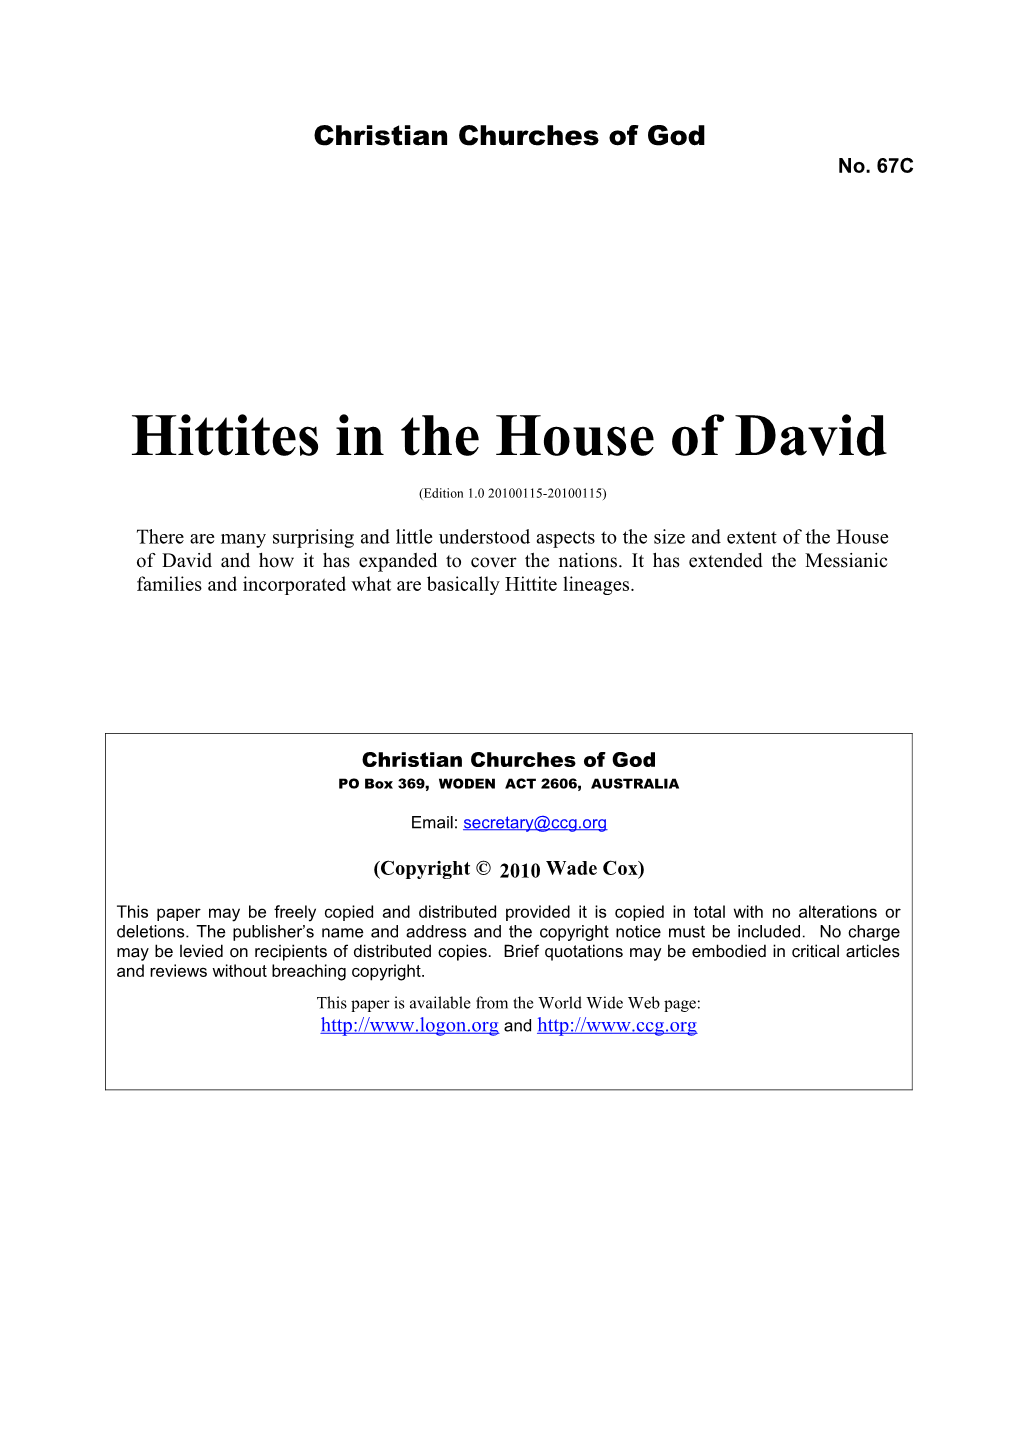 Hittites in the House of David (No. 67C)